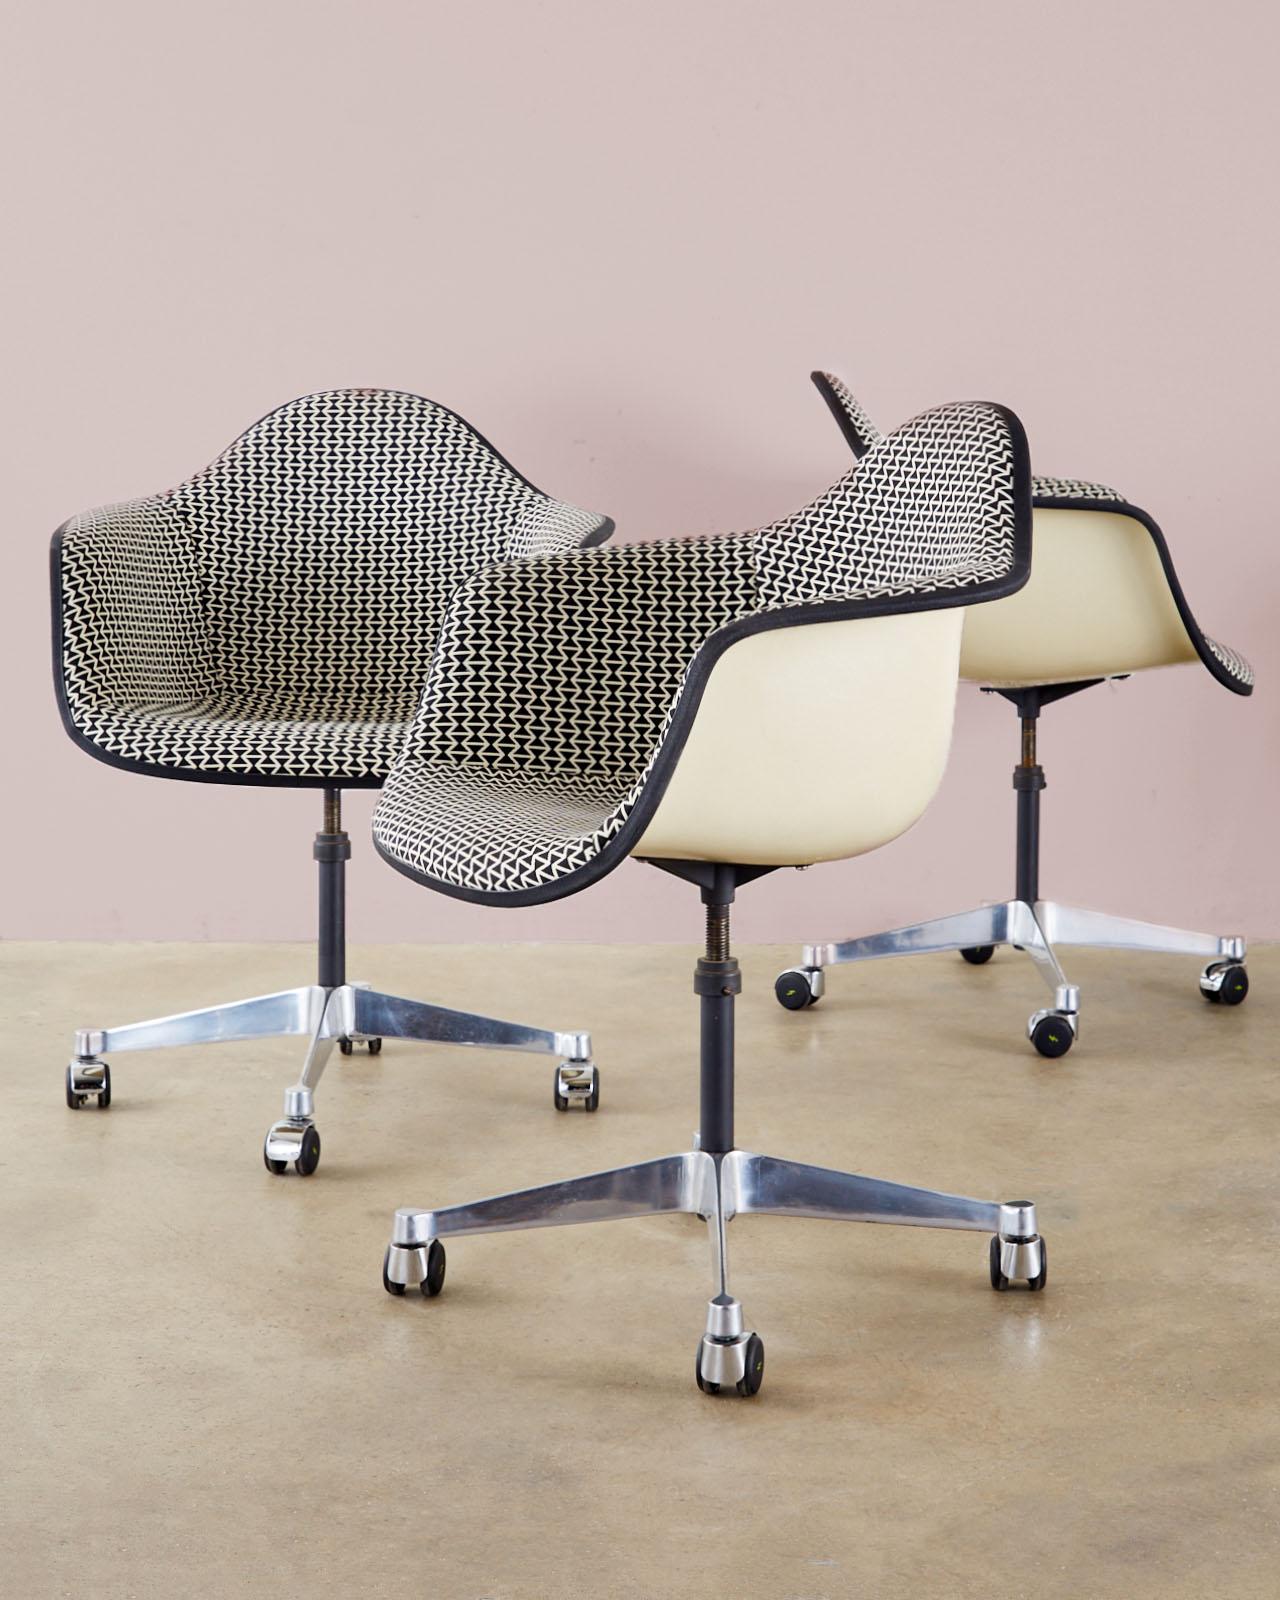 Dazzling mid-century set of four padded swivel chairs by Charles and Ray Eames for Herman Miller. The fiberglass shells are upholstered in a rare geometric black and white print with a black border. Supported by a four star polished swivel base